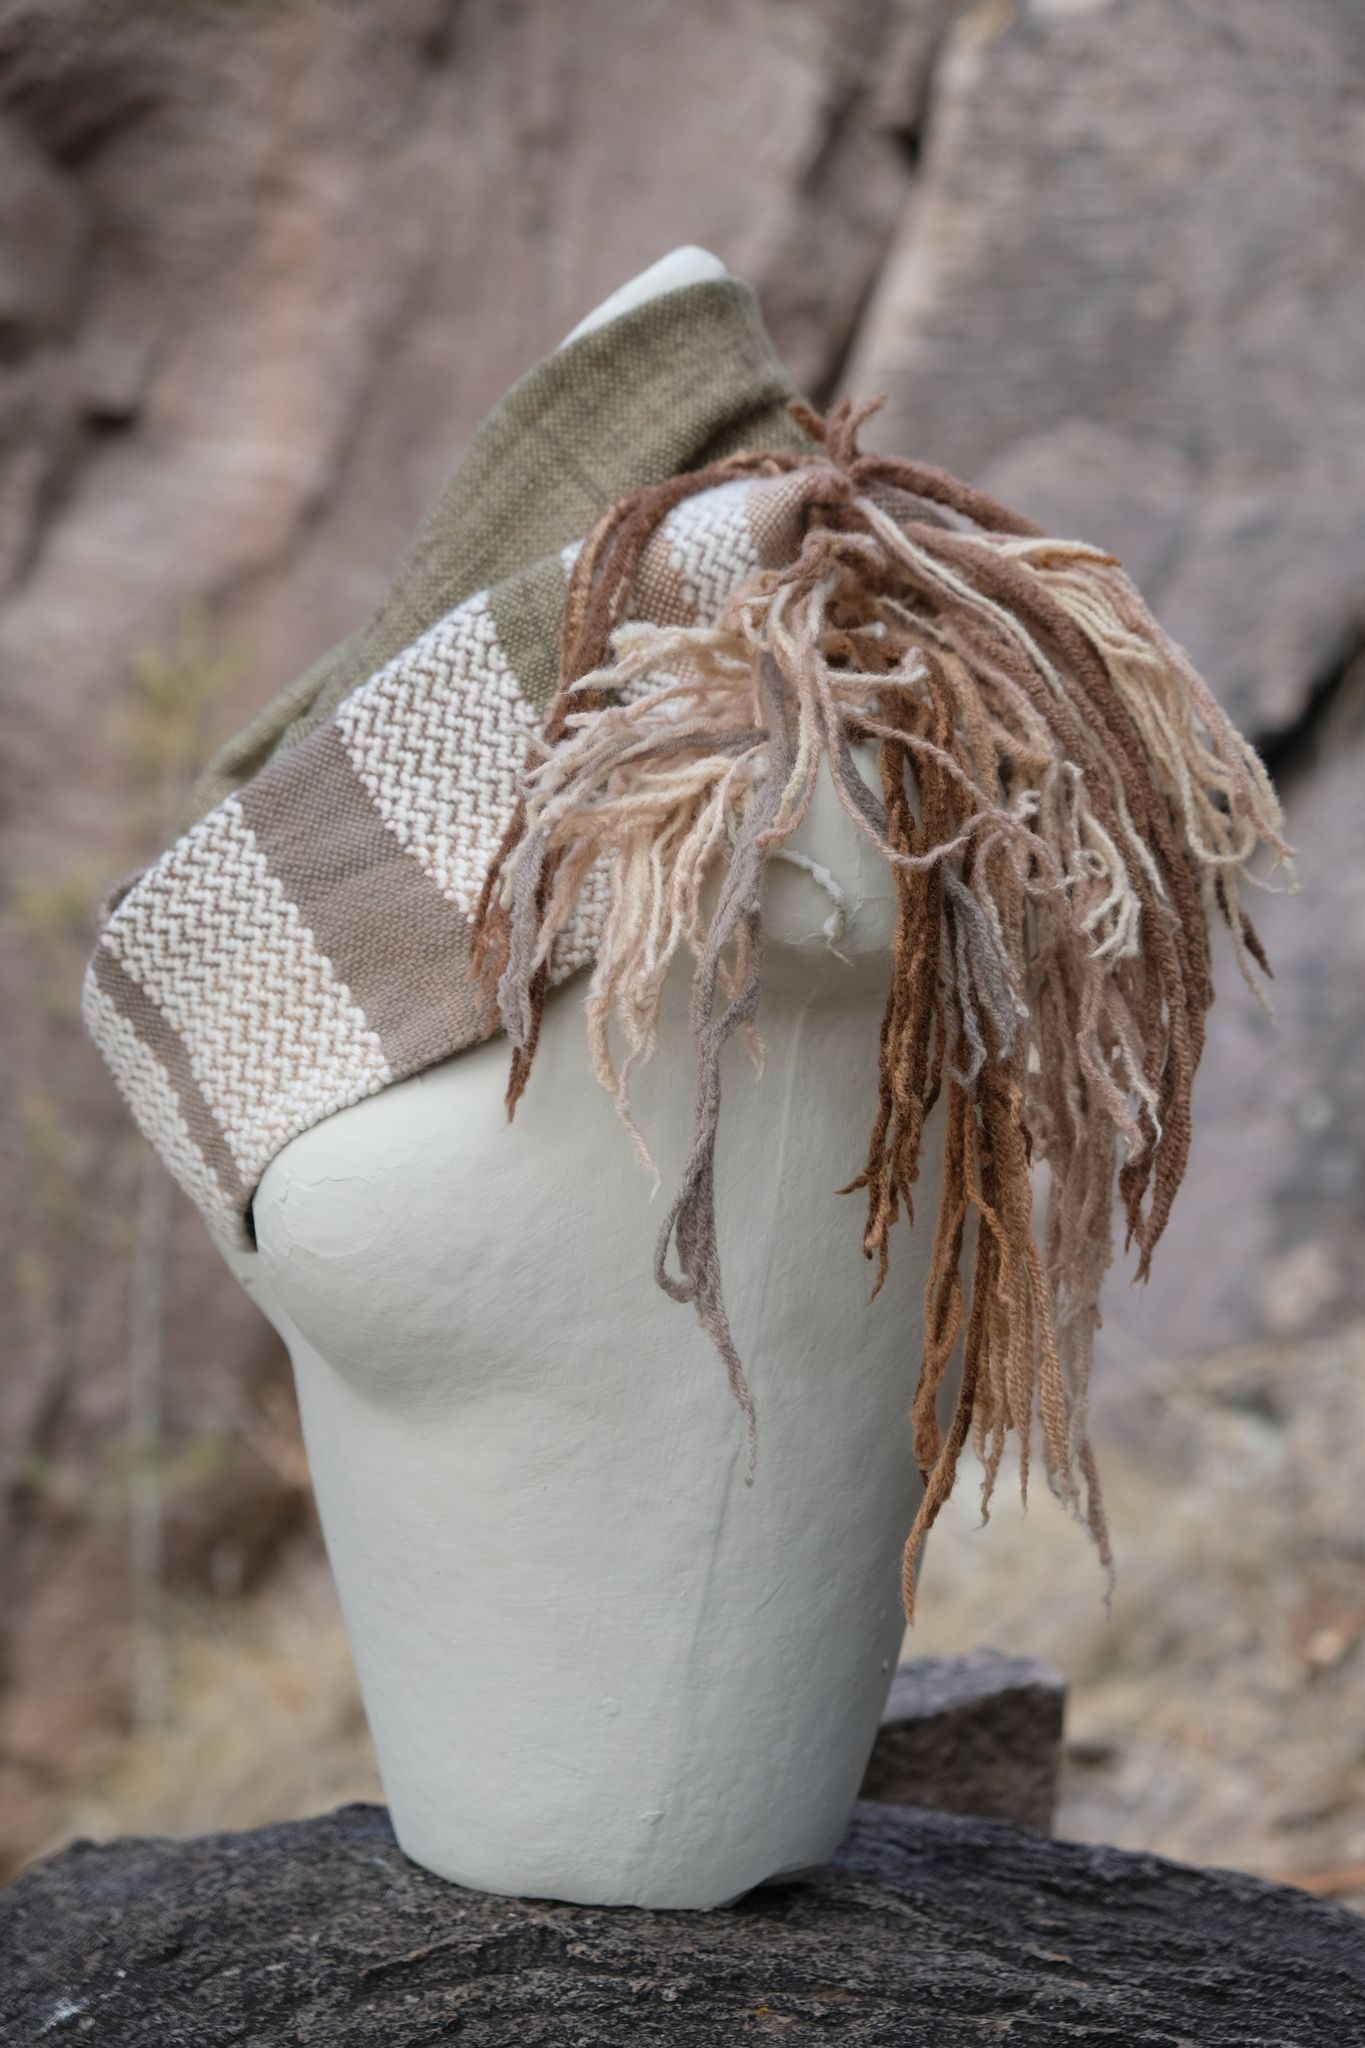 Highly textured and fringy wool and cashmere cowl scarf in green, tan and brown on a white mannequin